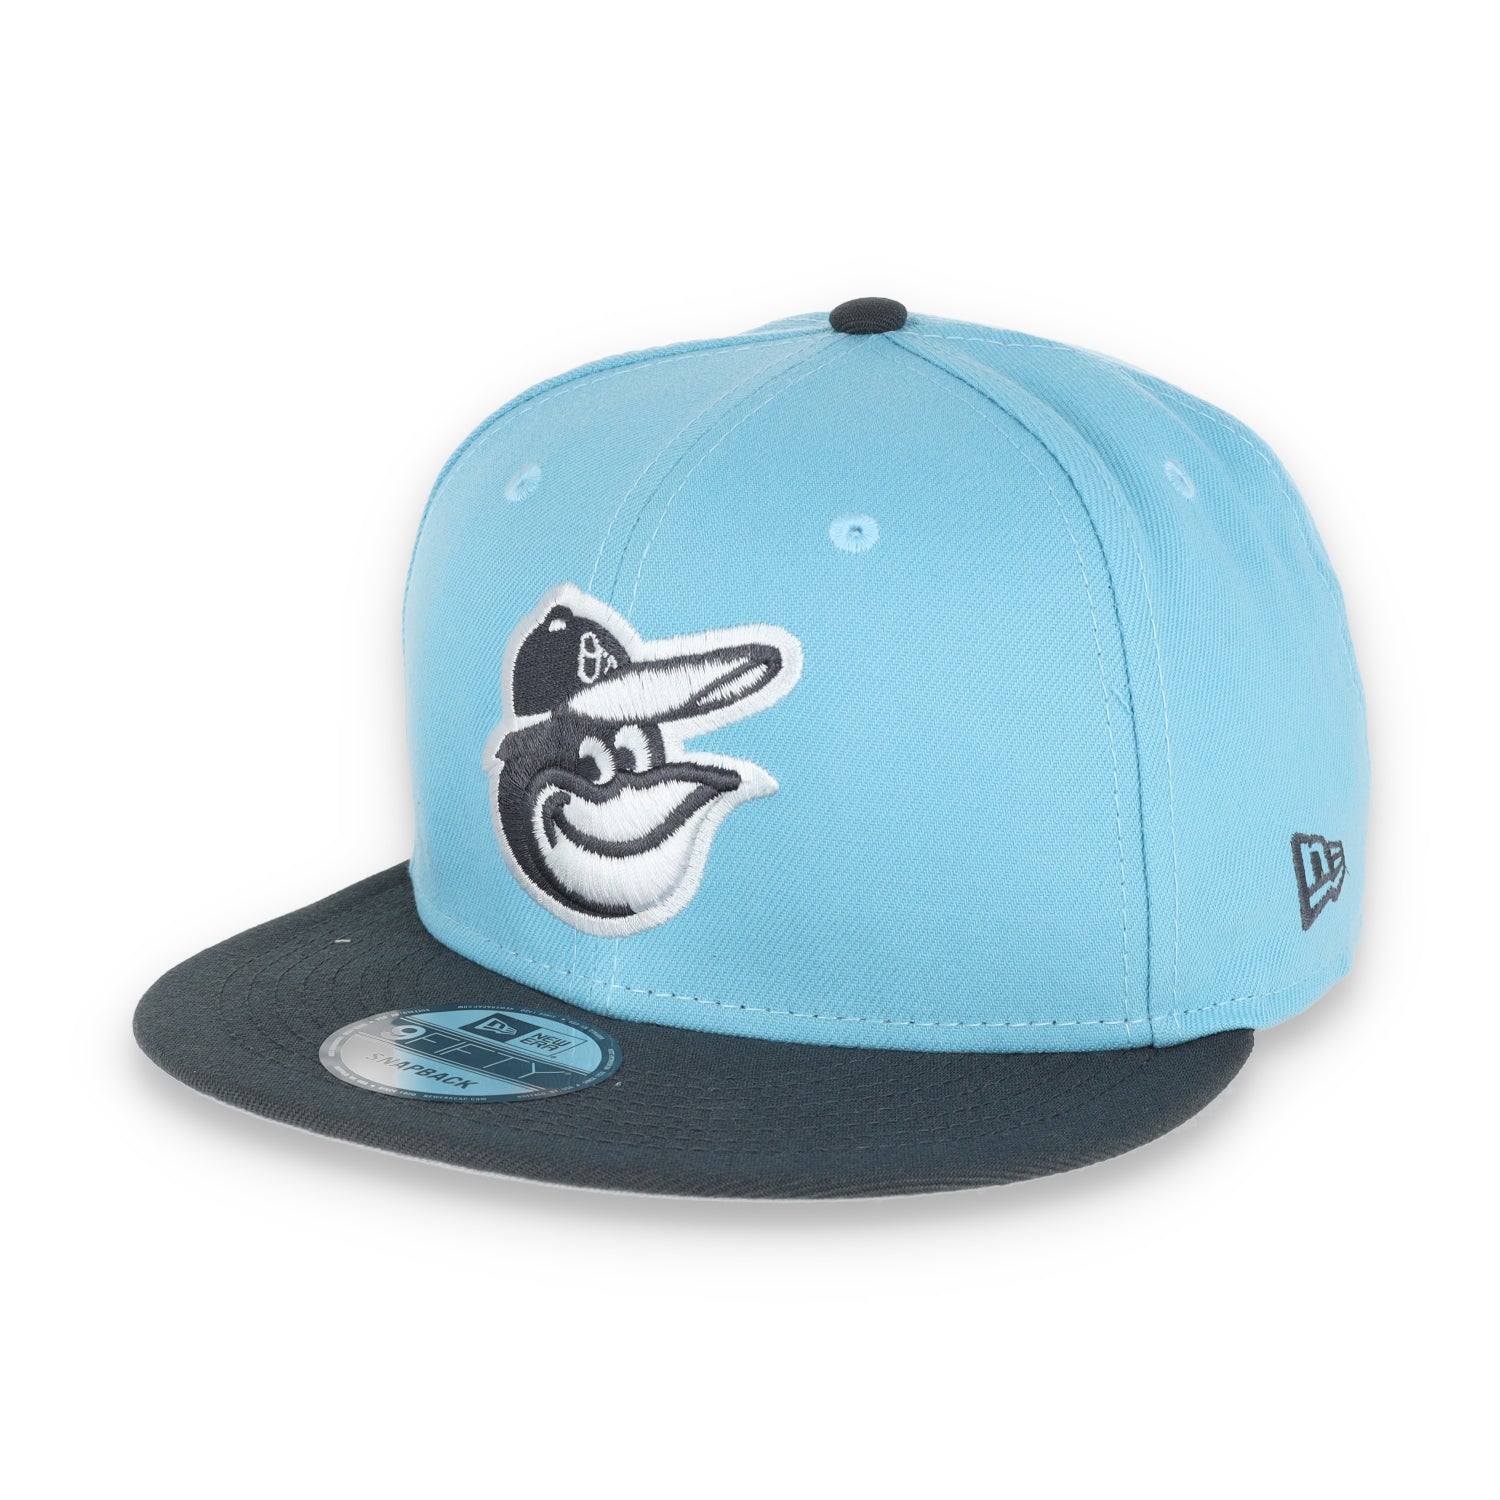 NEW ERA BALTIMORE ORIOLES 9FIFTY COLOR PACK SNAPBACK-BLUE